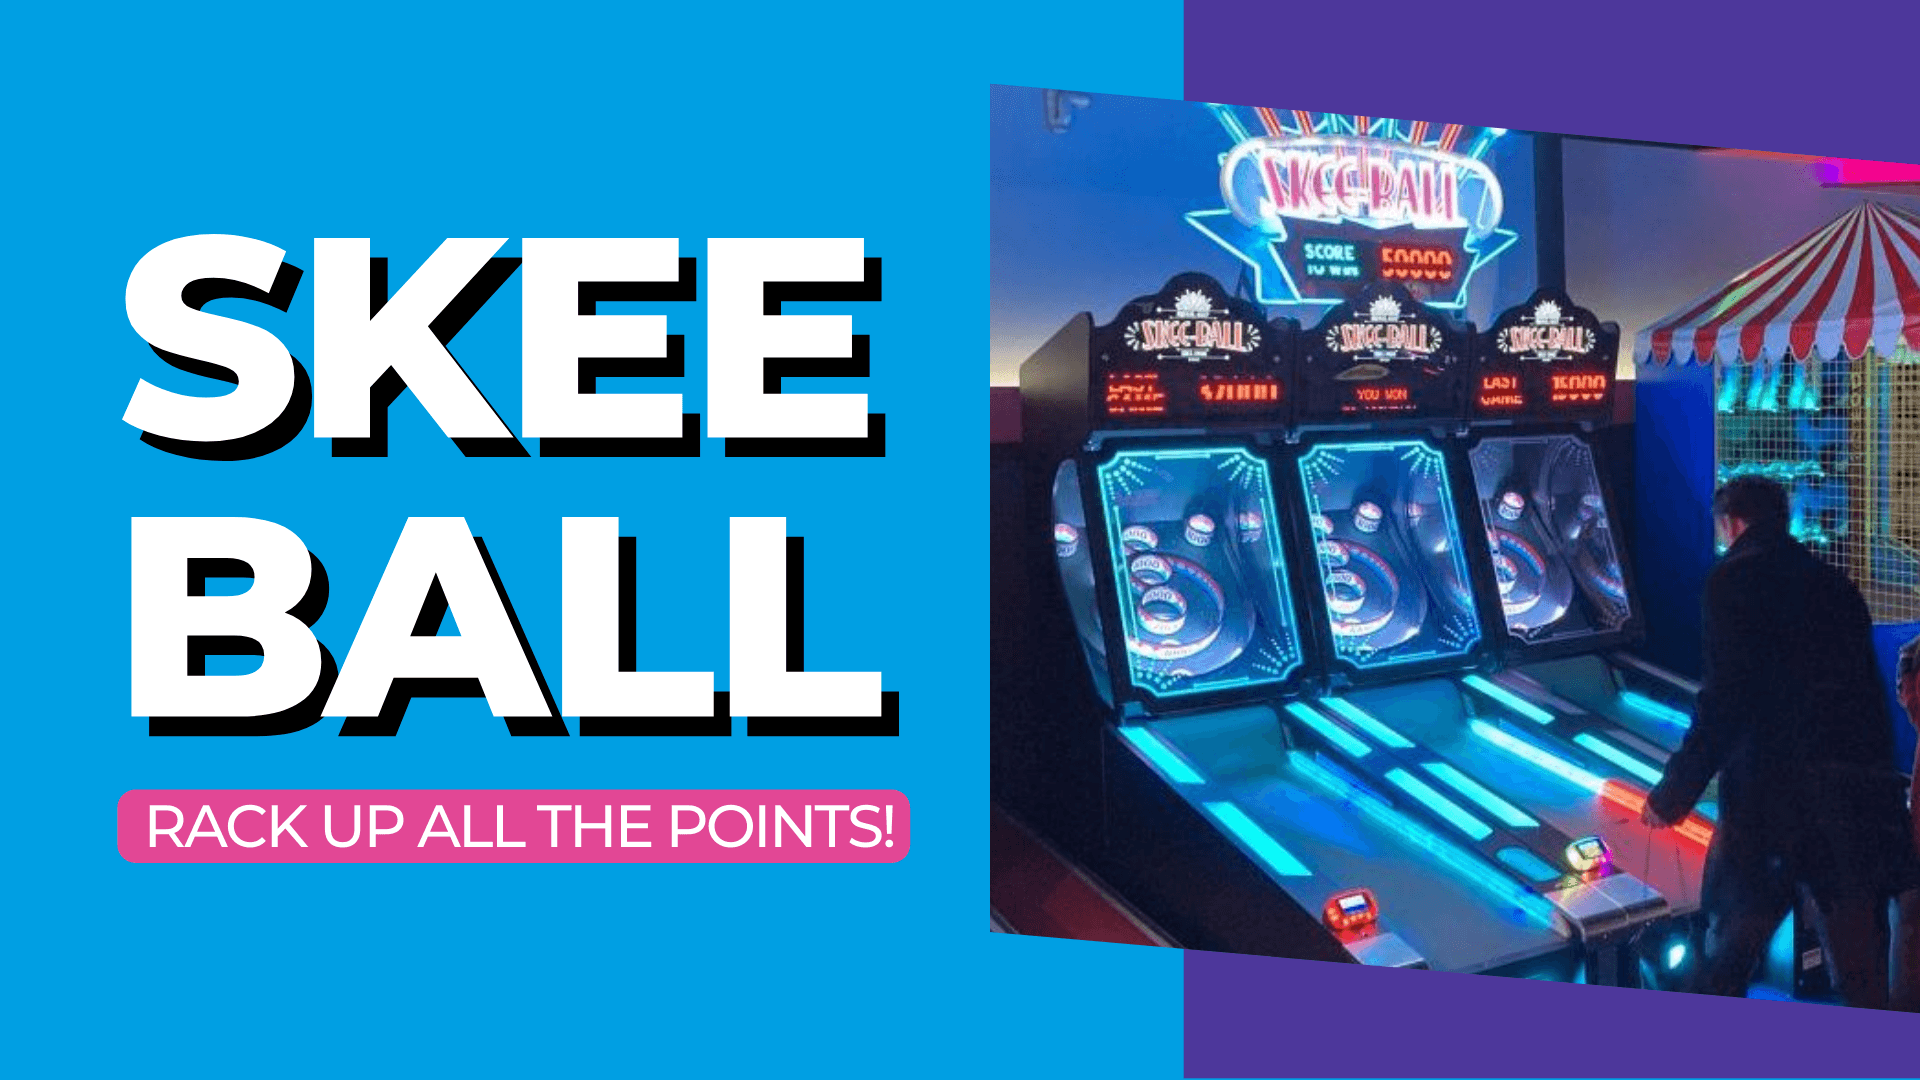 Skee Ball: Rack up all the points! - Gamestate